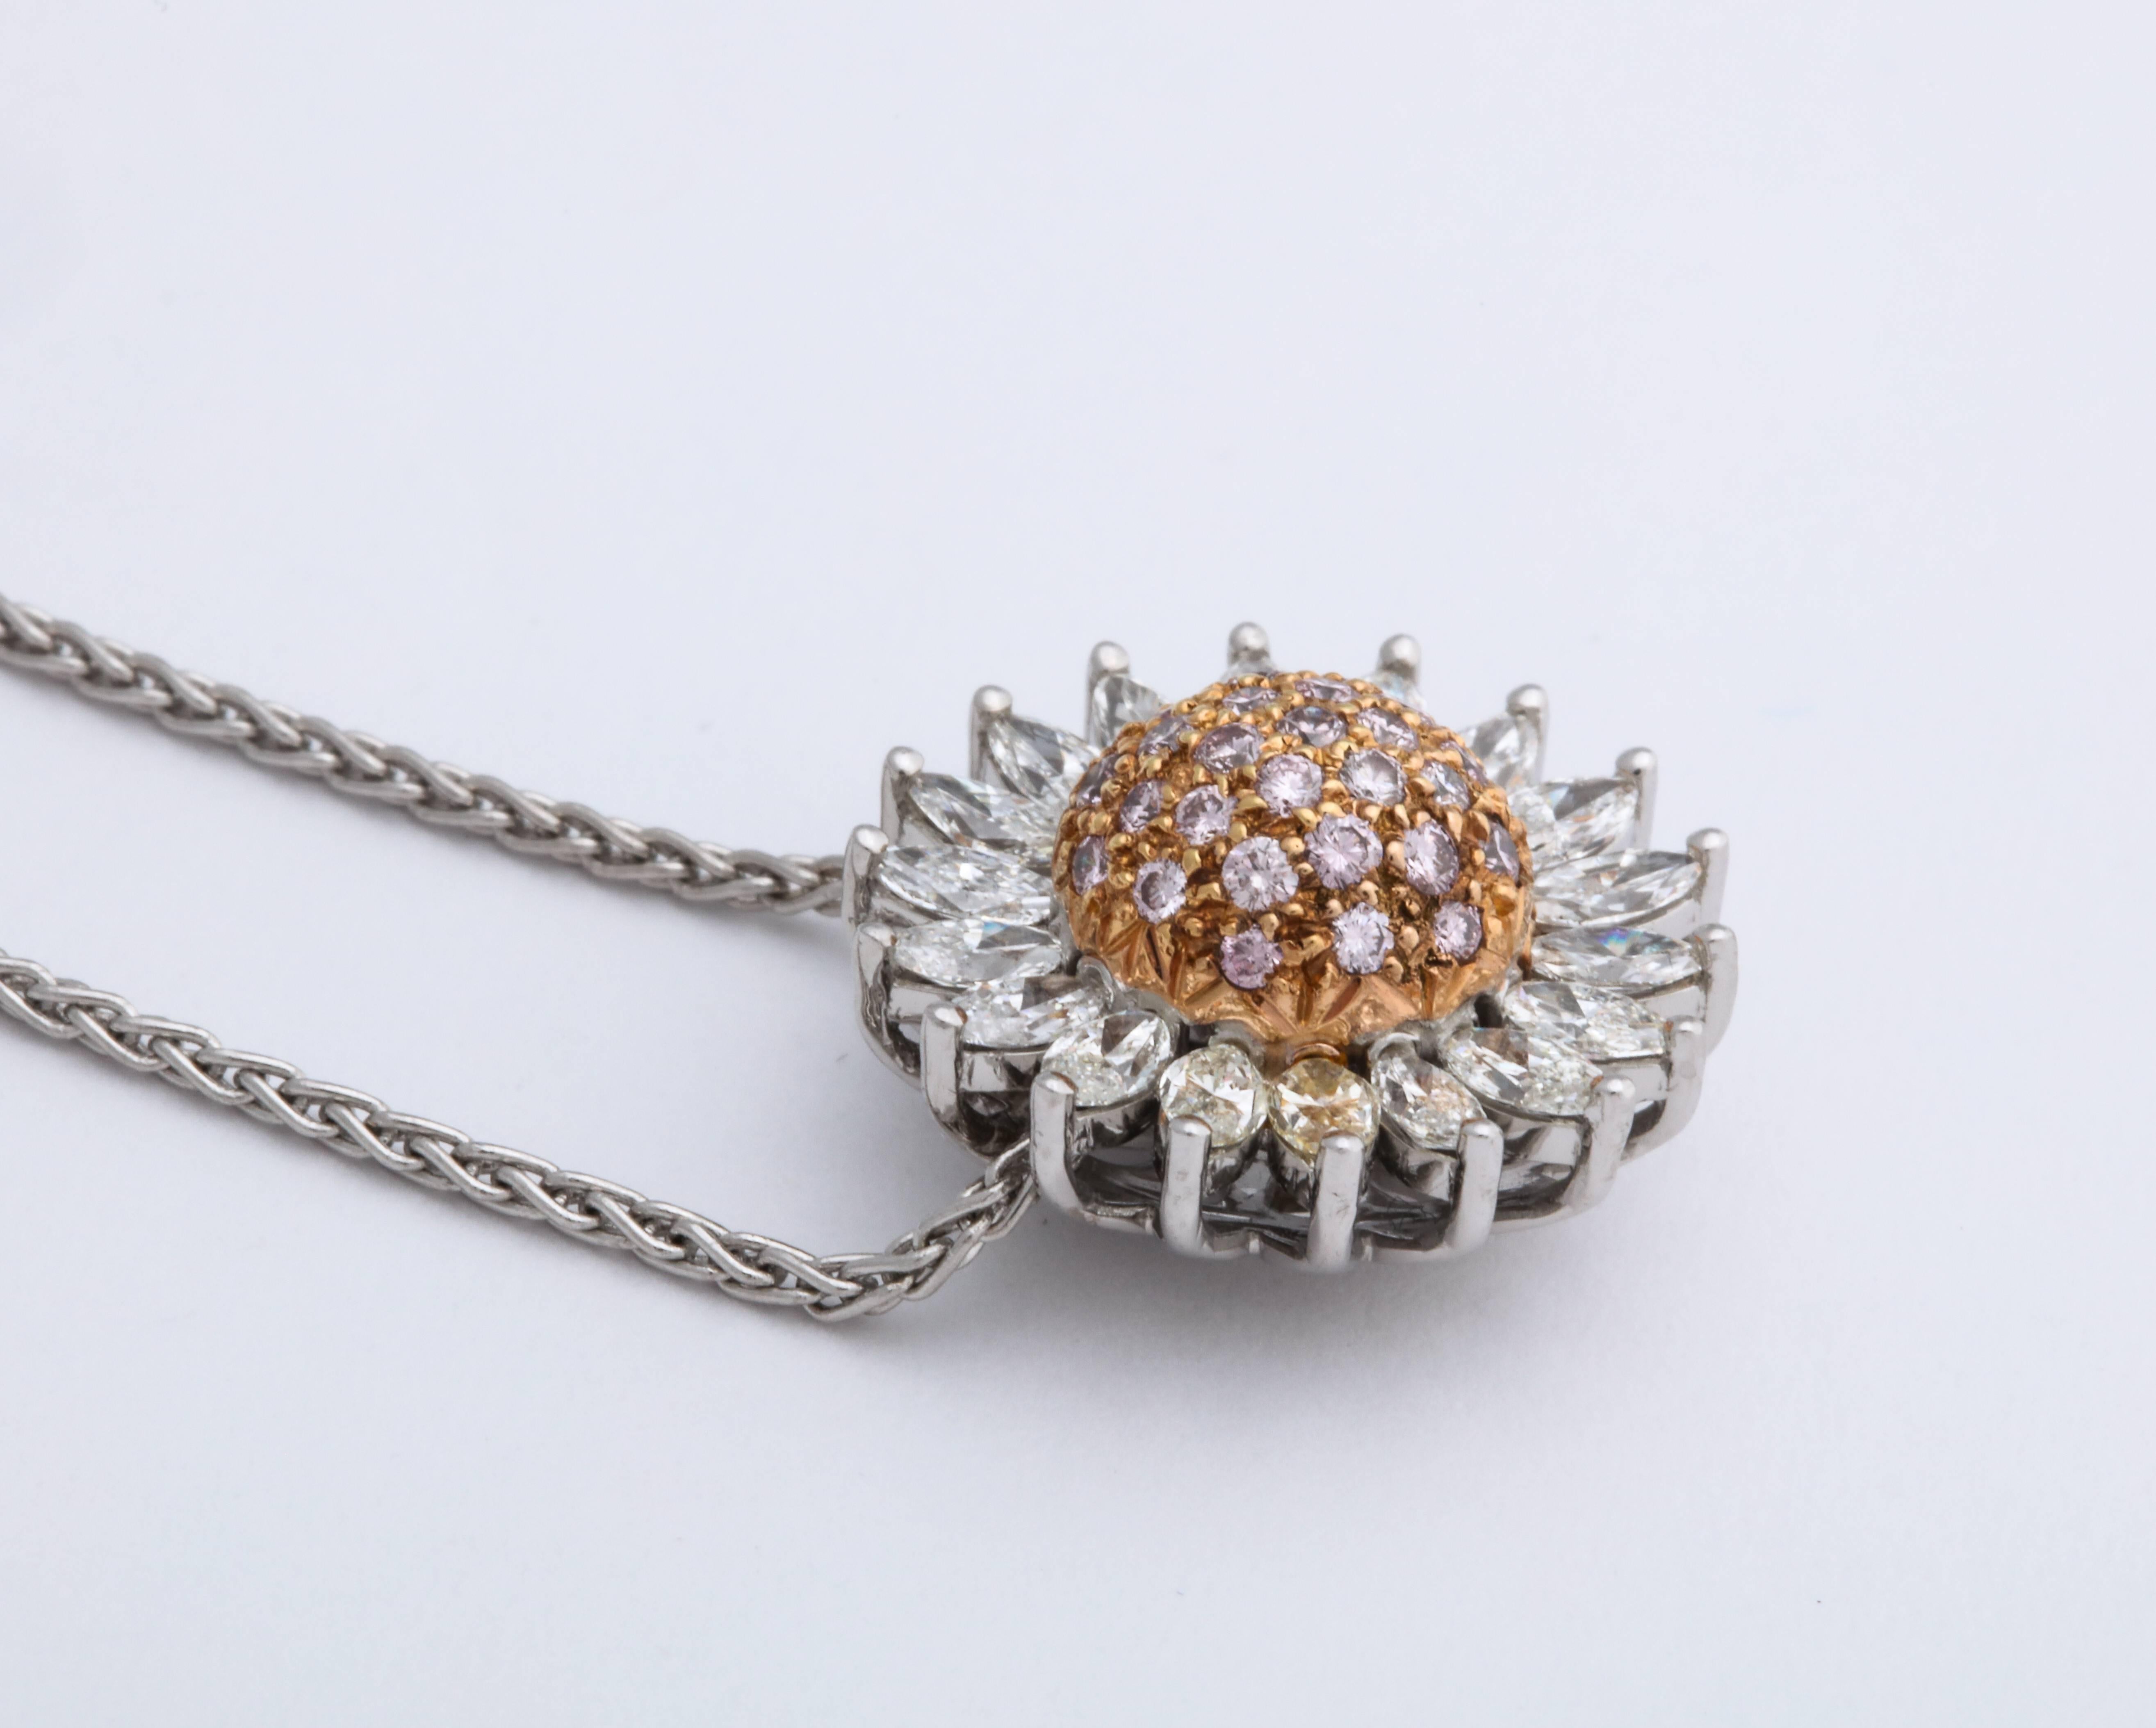 Domed semi-sephirical Rose Gold pave-set with round brilliant-cut natural fancy pink diamonds weighing 0.40 carats, radiating with prong-set colorless marquise diamond trim weighing 1.33 carats. The pendant floats freely on the concealed 18K white